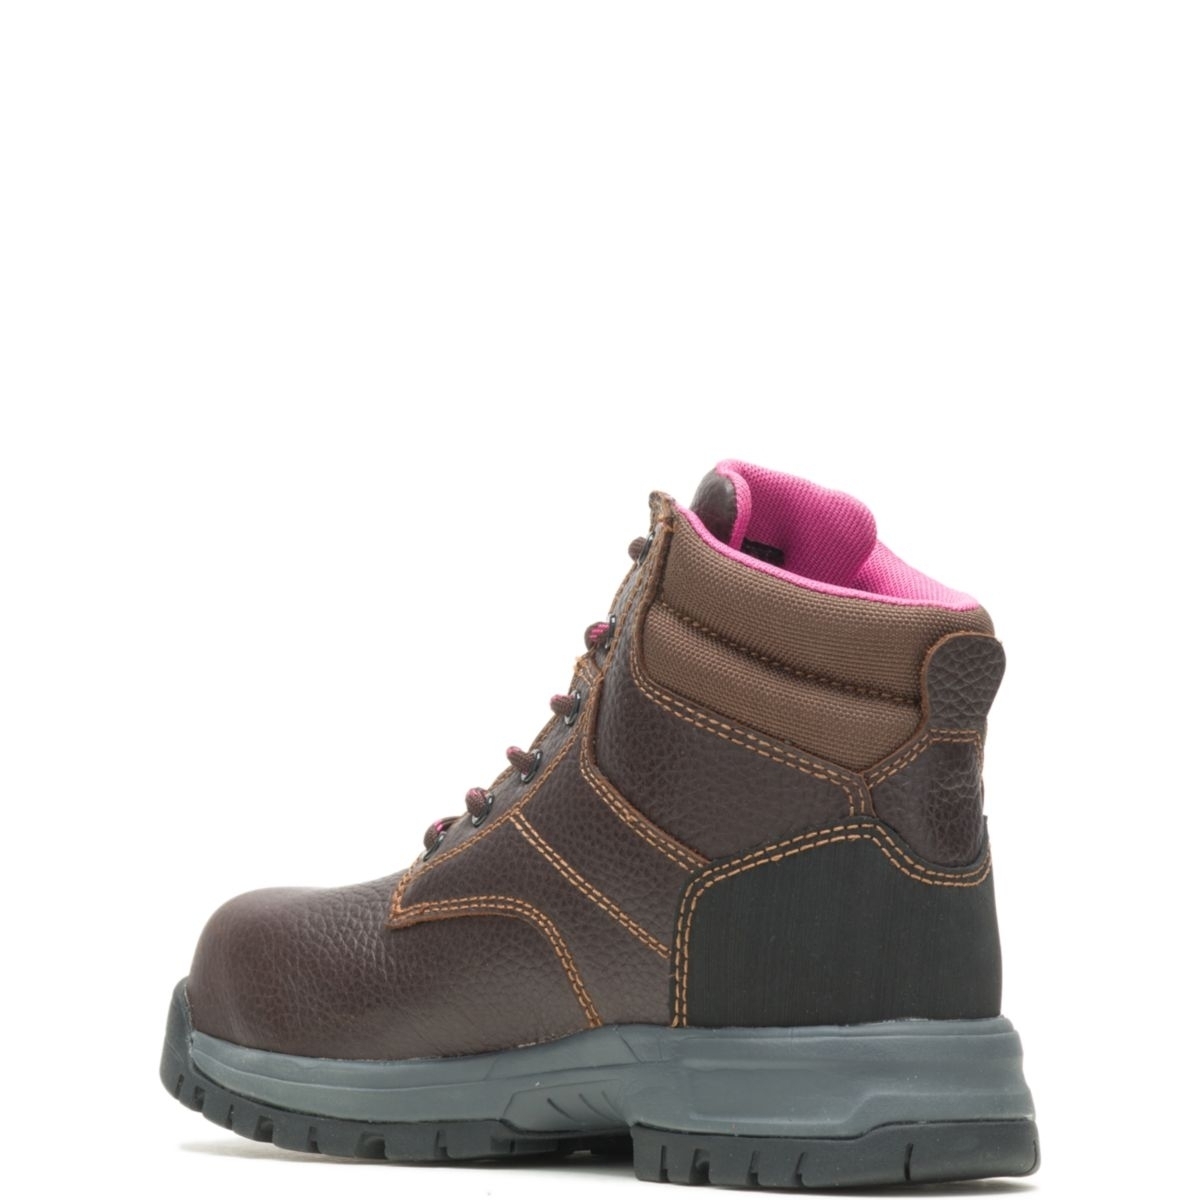 WOLVERINE Women's Piper Composite Toe Work Boot Brown - W10180 BROWN - BROWN, 9.5-D